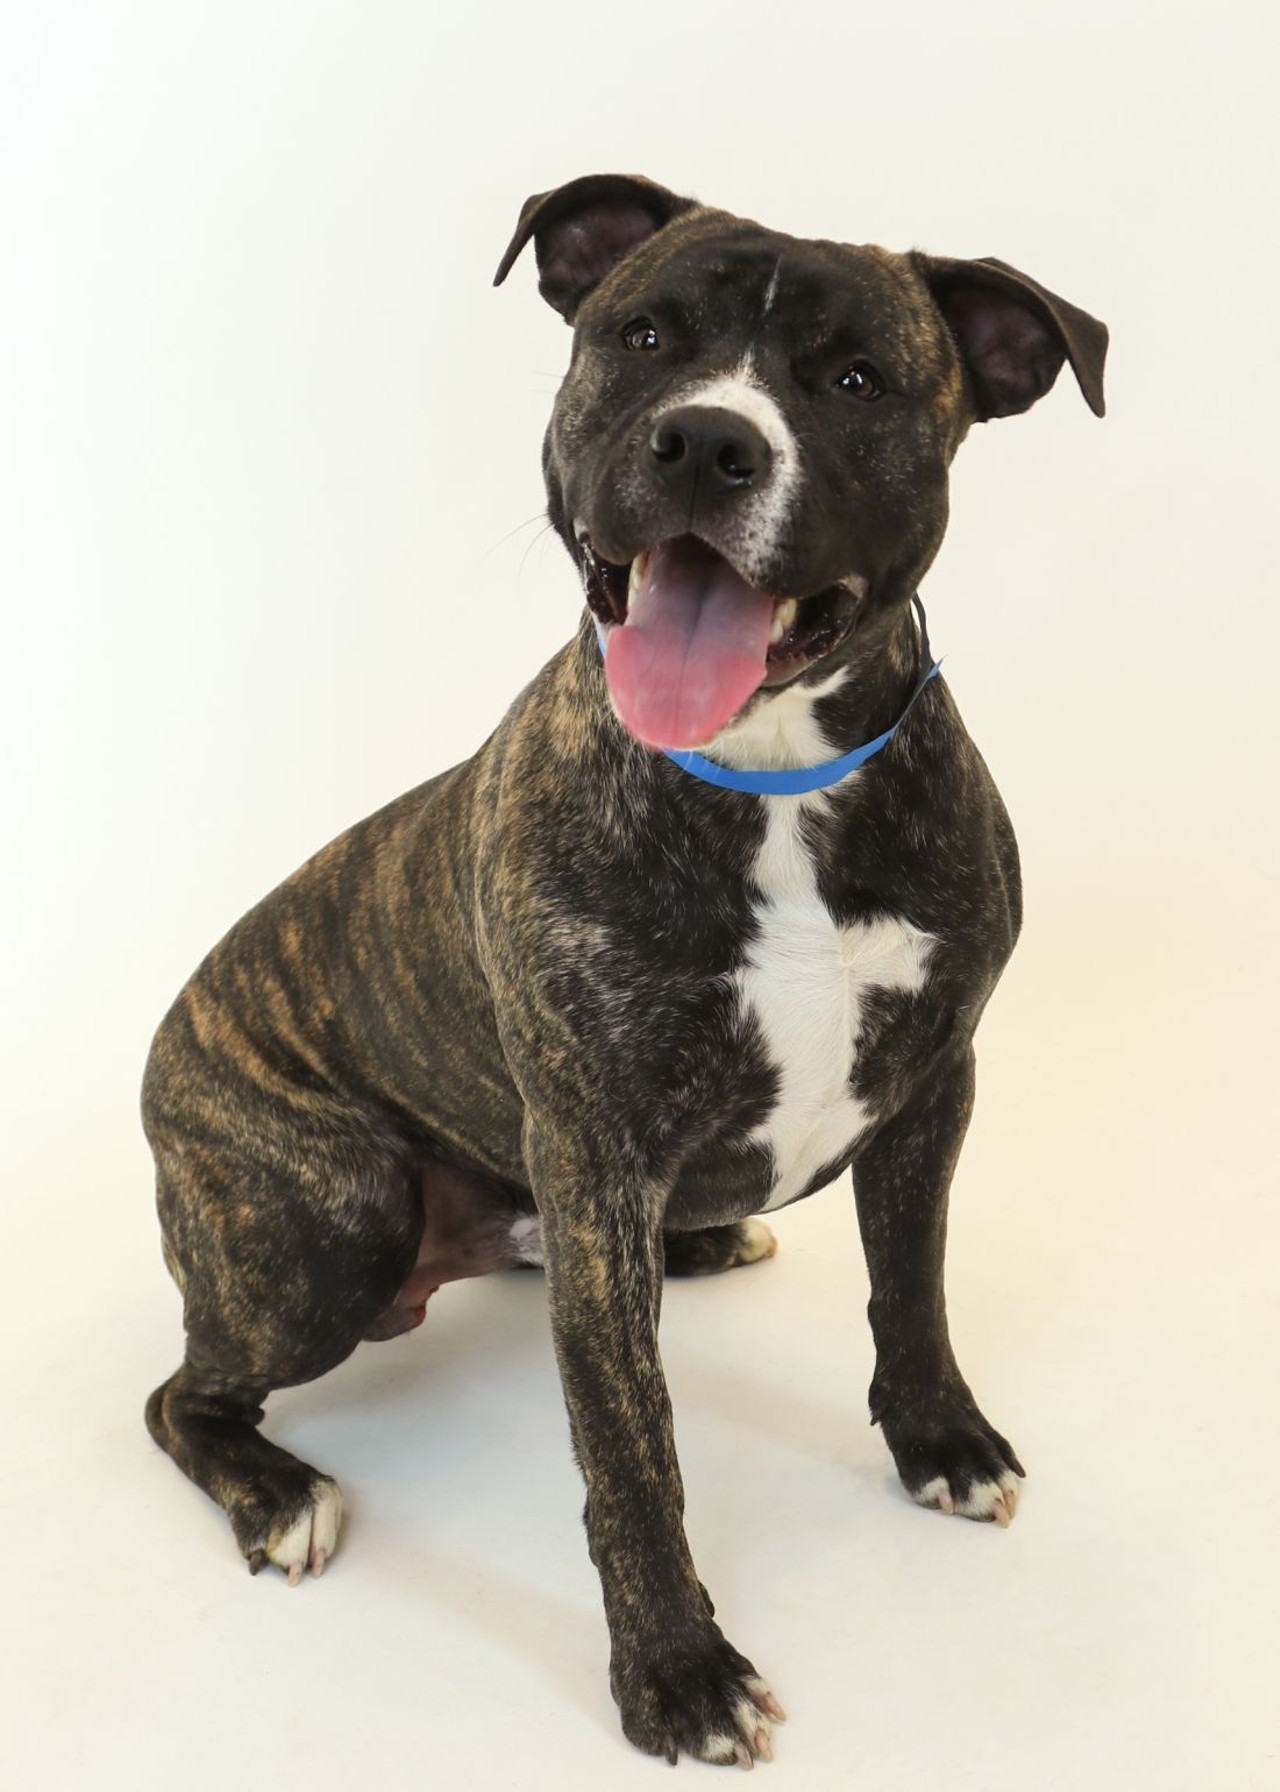 NAME: Zeus
GENDER: Male
BREED: Pit Bull Terrier
AGE: 10 months
WEIGHT: 59 pounds
SPECIAL CONSIDERATIONS: None
REASON I CAME TO MHS: Owner surrender
LOCATION: Mackey Center for Animal Care in Detroit
ID NUMBER: 865654